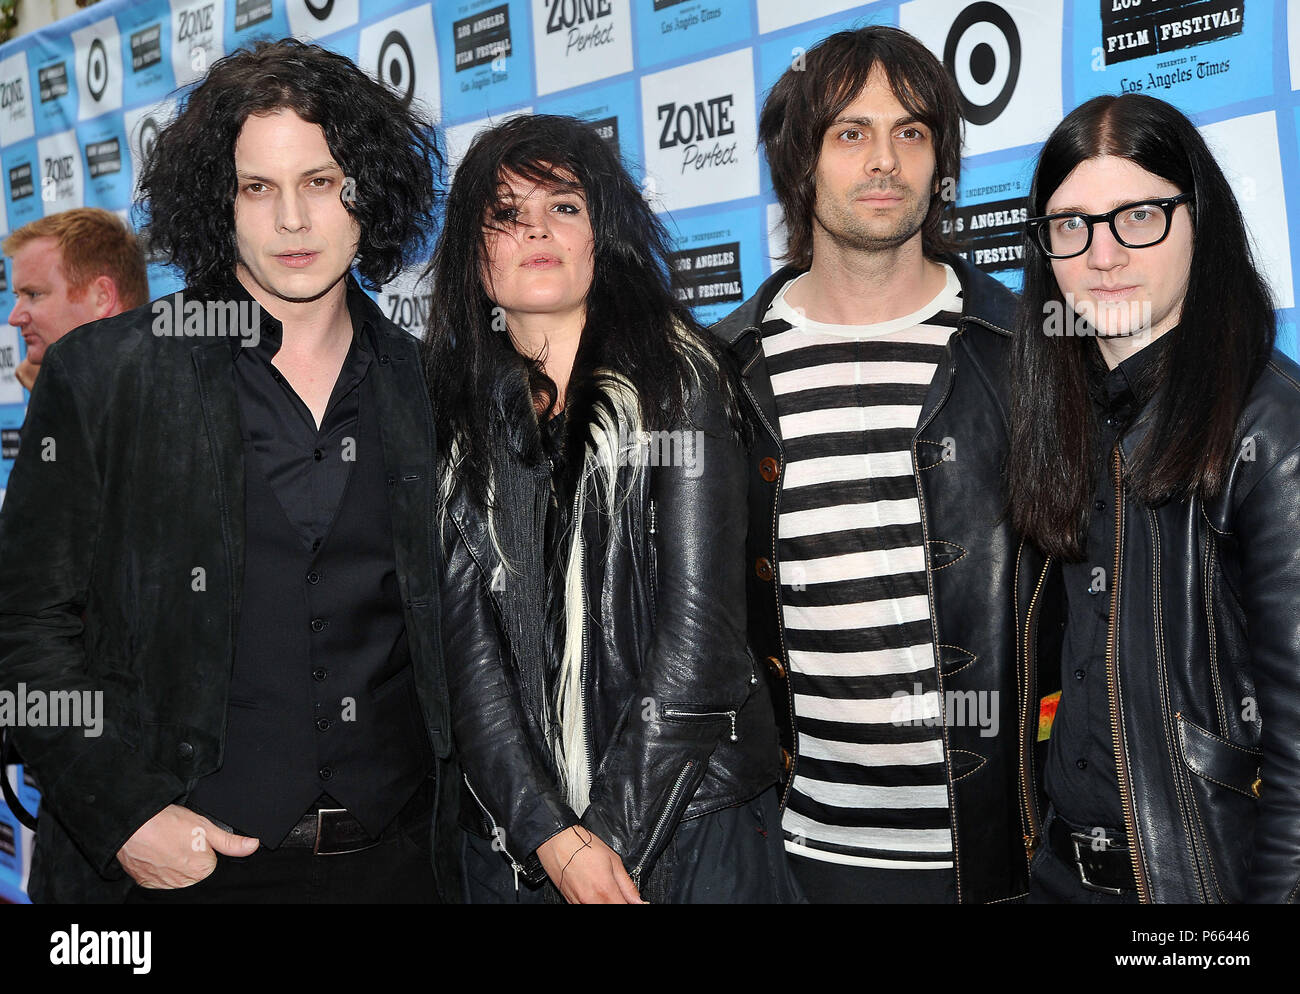 Jack White, Alison Mosshart ( of The Kills ), Dean Fertita ( of the Queens of Stone Age ), Jack lawrence ( of the Raconteurs )- It May Get loud Premiere at the LA Film Festival at the Man Festival Theatre In Los Angeles.          -            TheDeadWeather 24.jpgTheDeadWeather 24  Event in Hollywood Life - California, Red Carpet Event, USA, Film Industry, Celebrities, Photography, Bestof, Arts Culture and Entertainment, Topix Celebrities fashion, Best of, Hollywood Life, Event in Hollywood Life - California, Red Carpet and backstage, ,Arts Culture and Entertainment, Photography,    inquiry ts Stock Photo